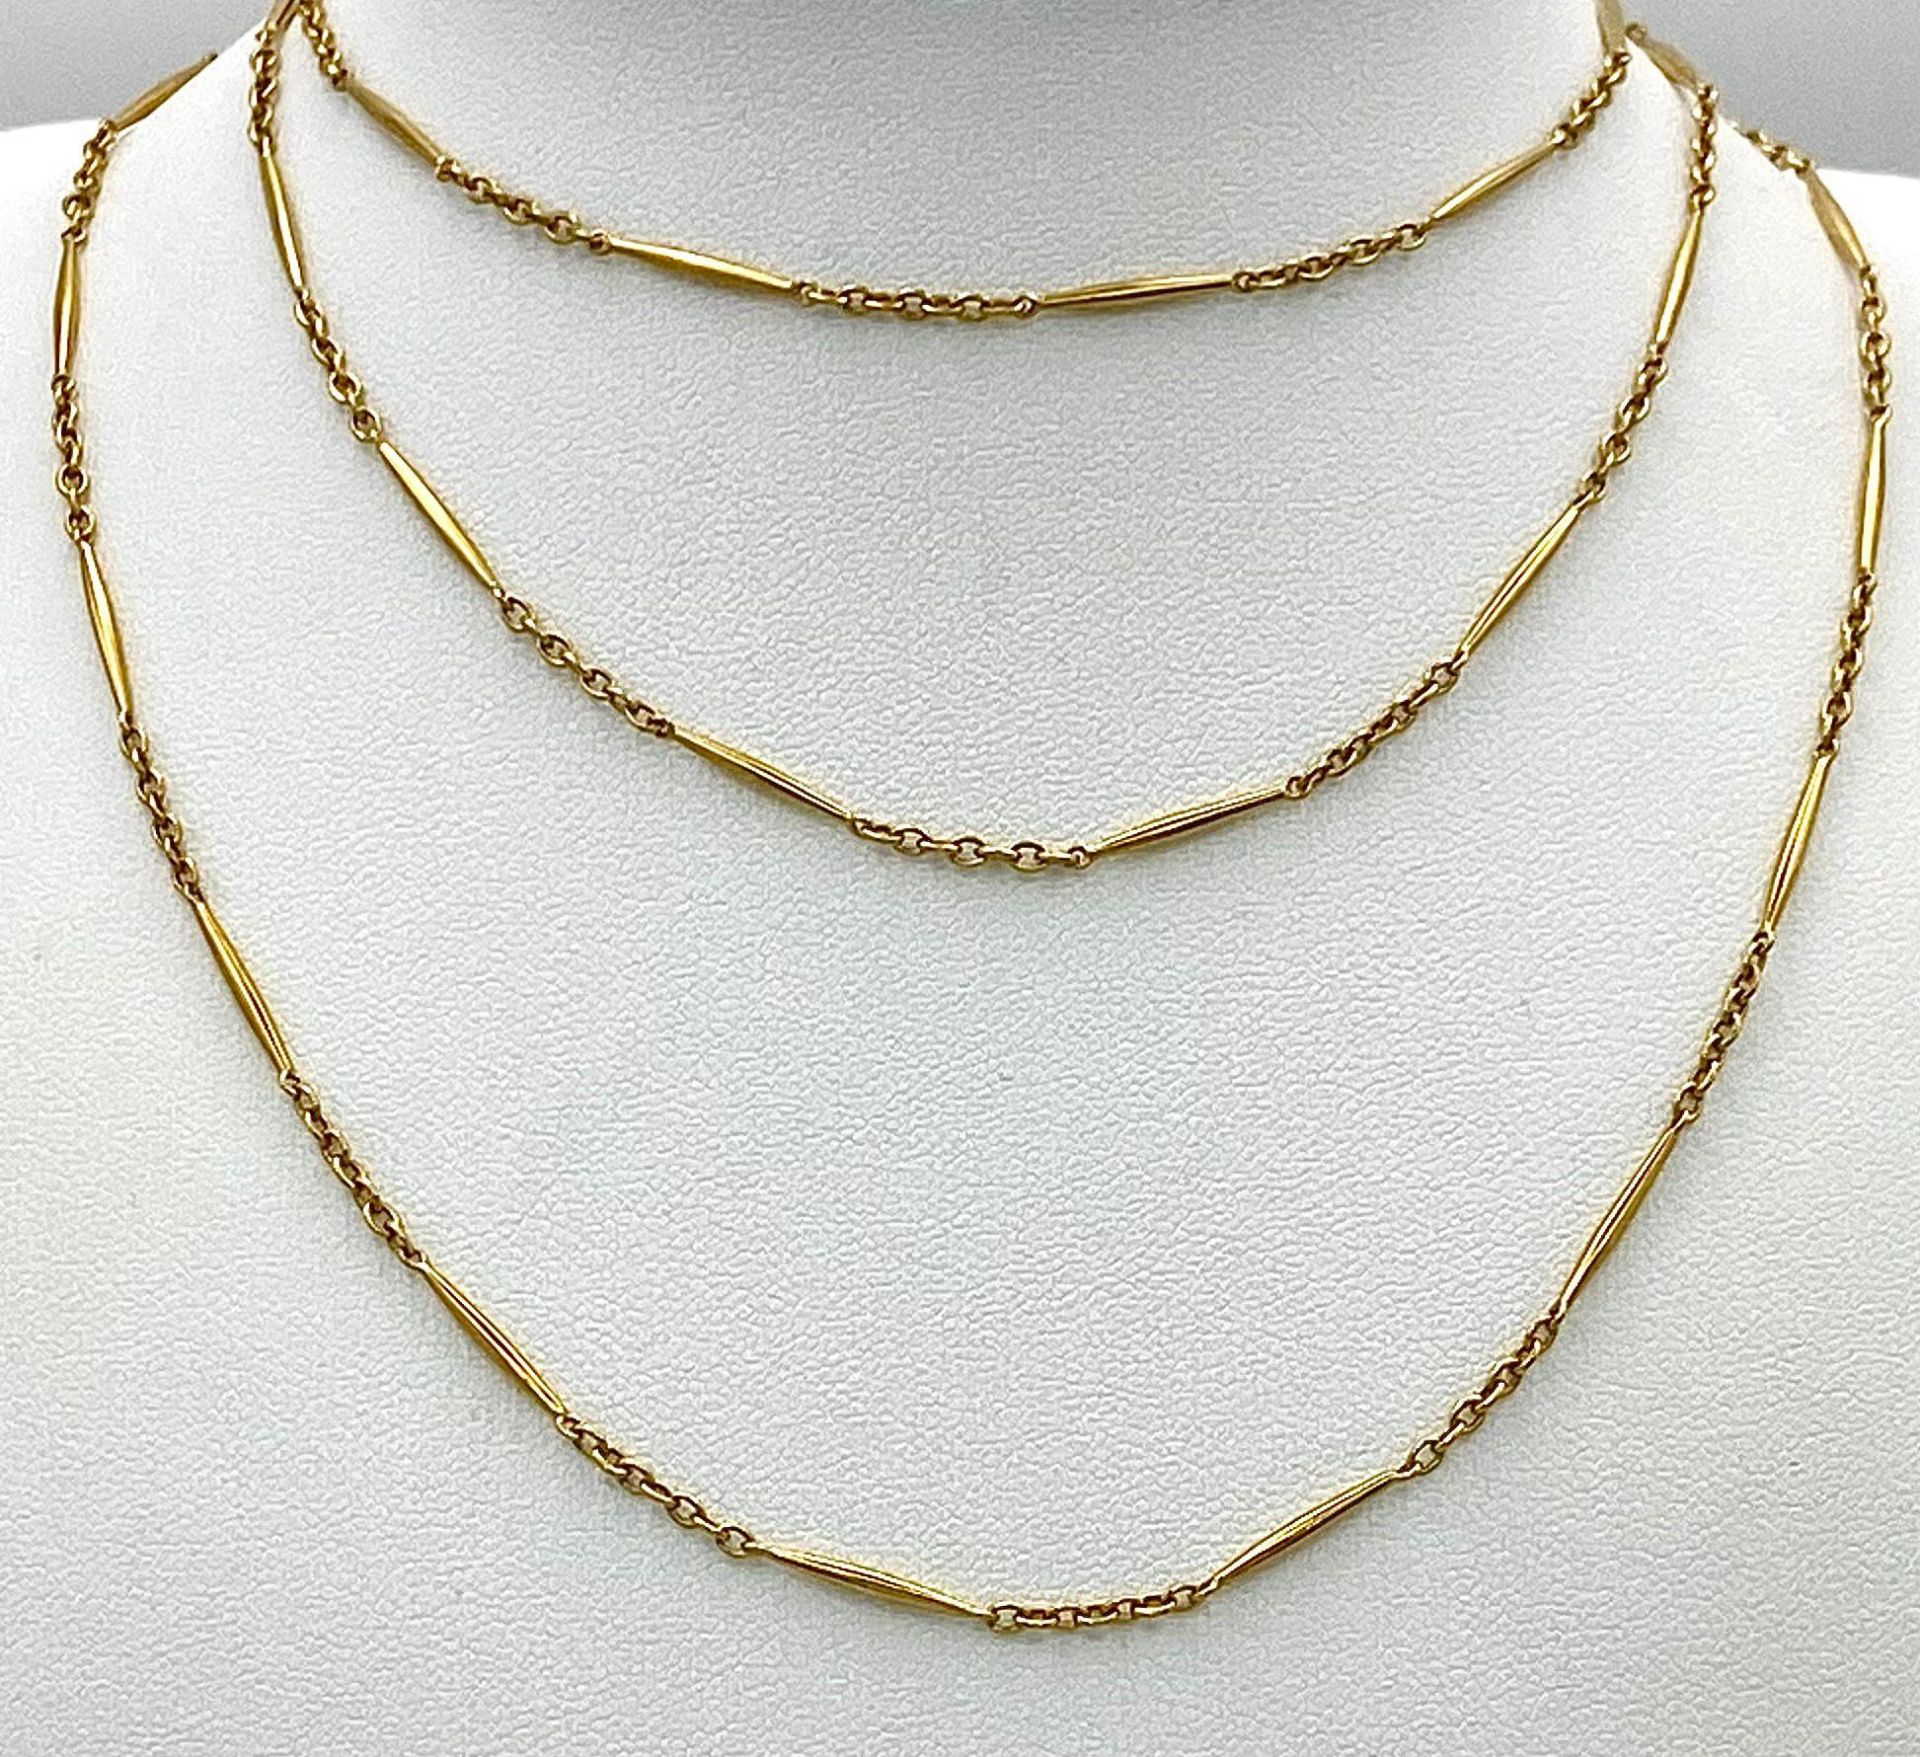 An unusual, 9 K yellow gold and very long (100 cm) chain necklace, that can be worn either as one